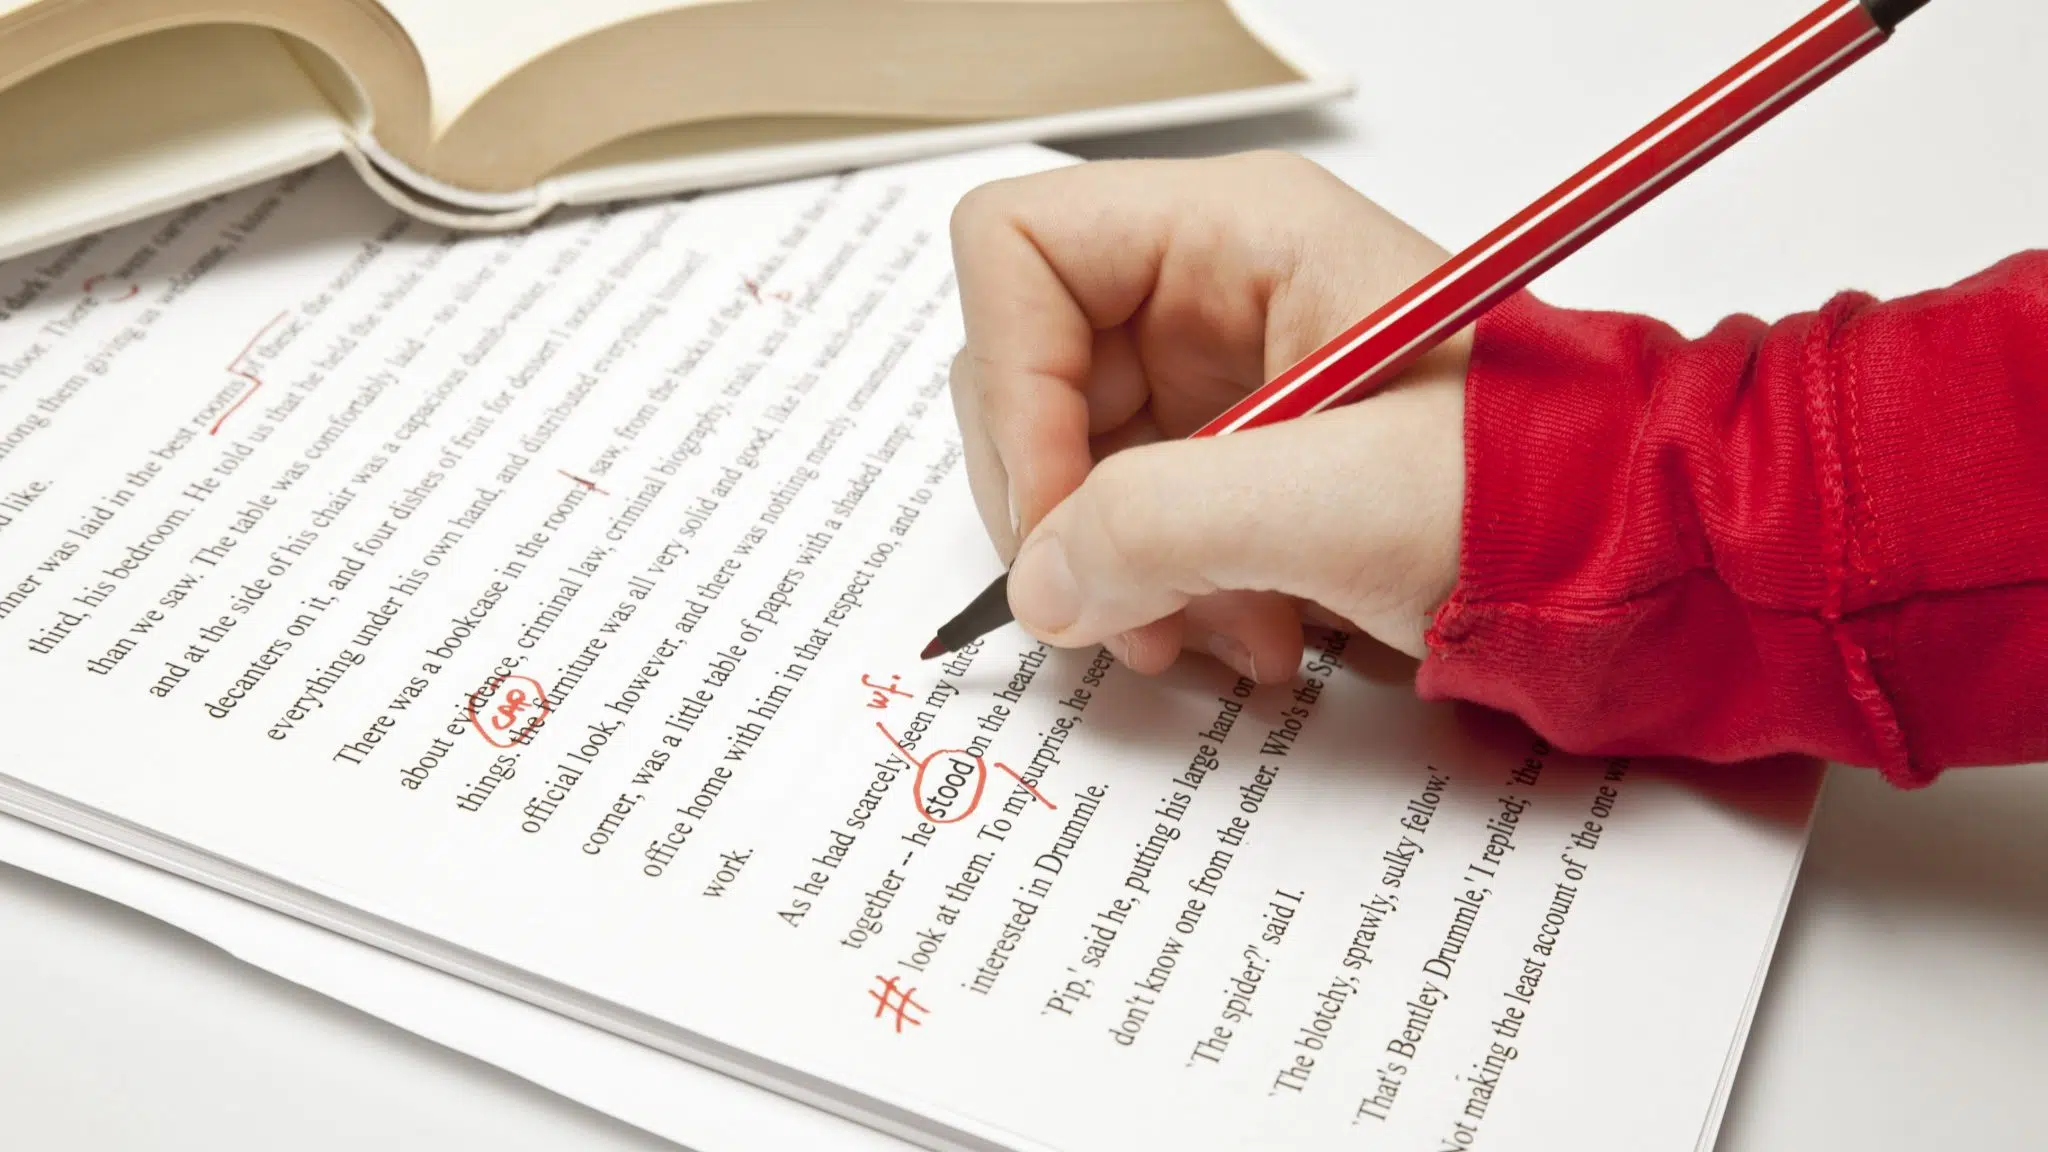 Proofreading gigs on Fiverr list